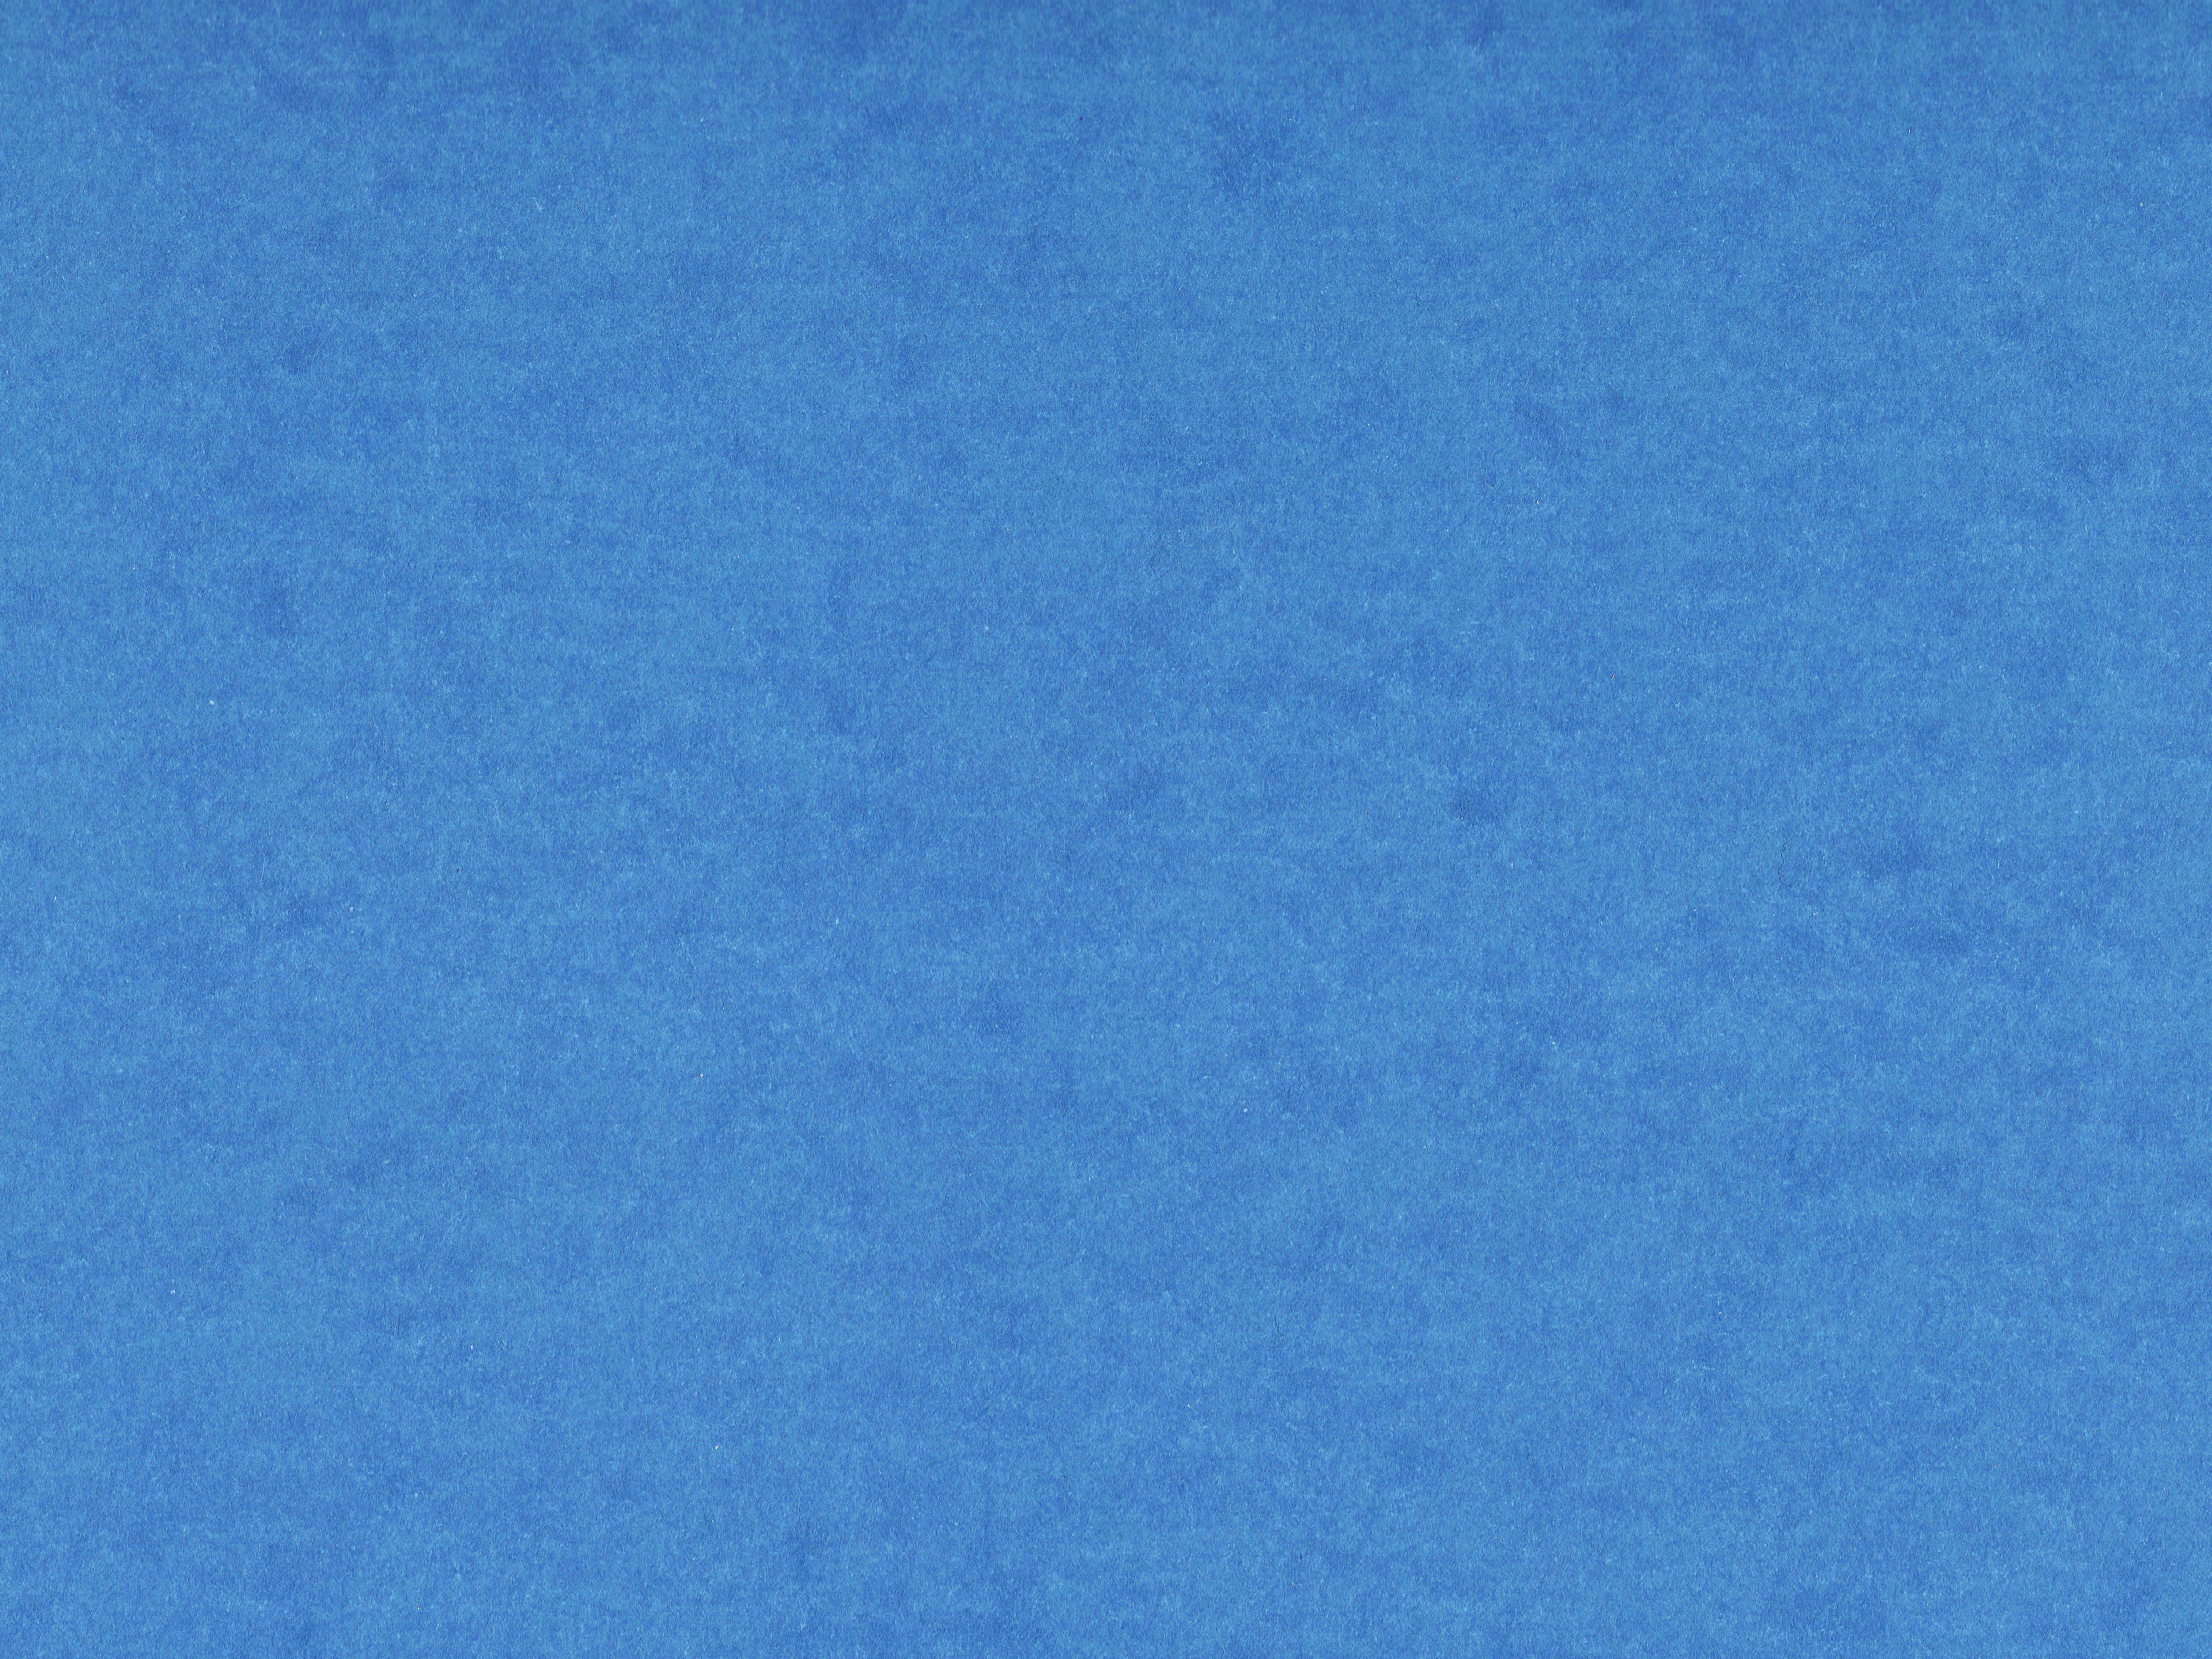 Blue paper textured background  free image by rawpixel.com